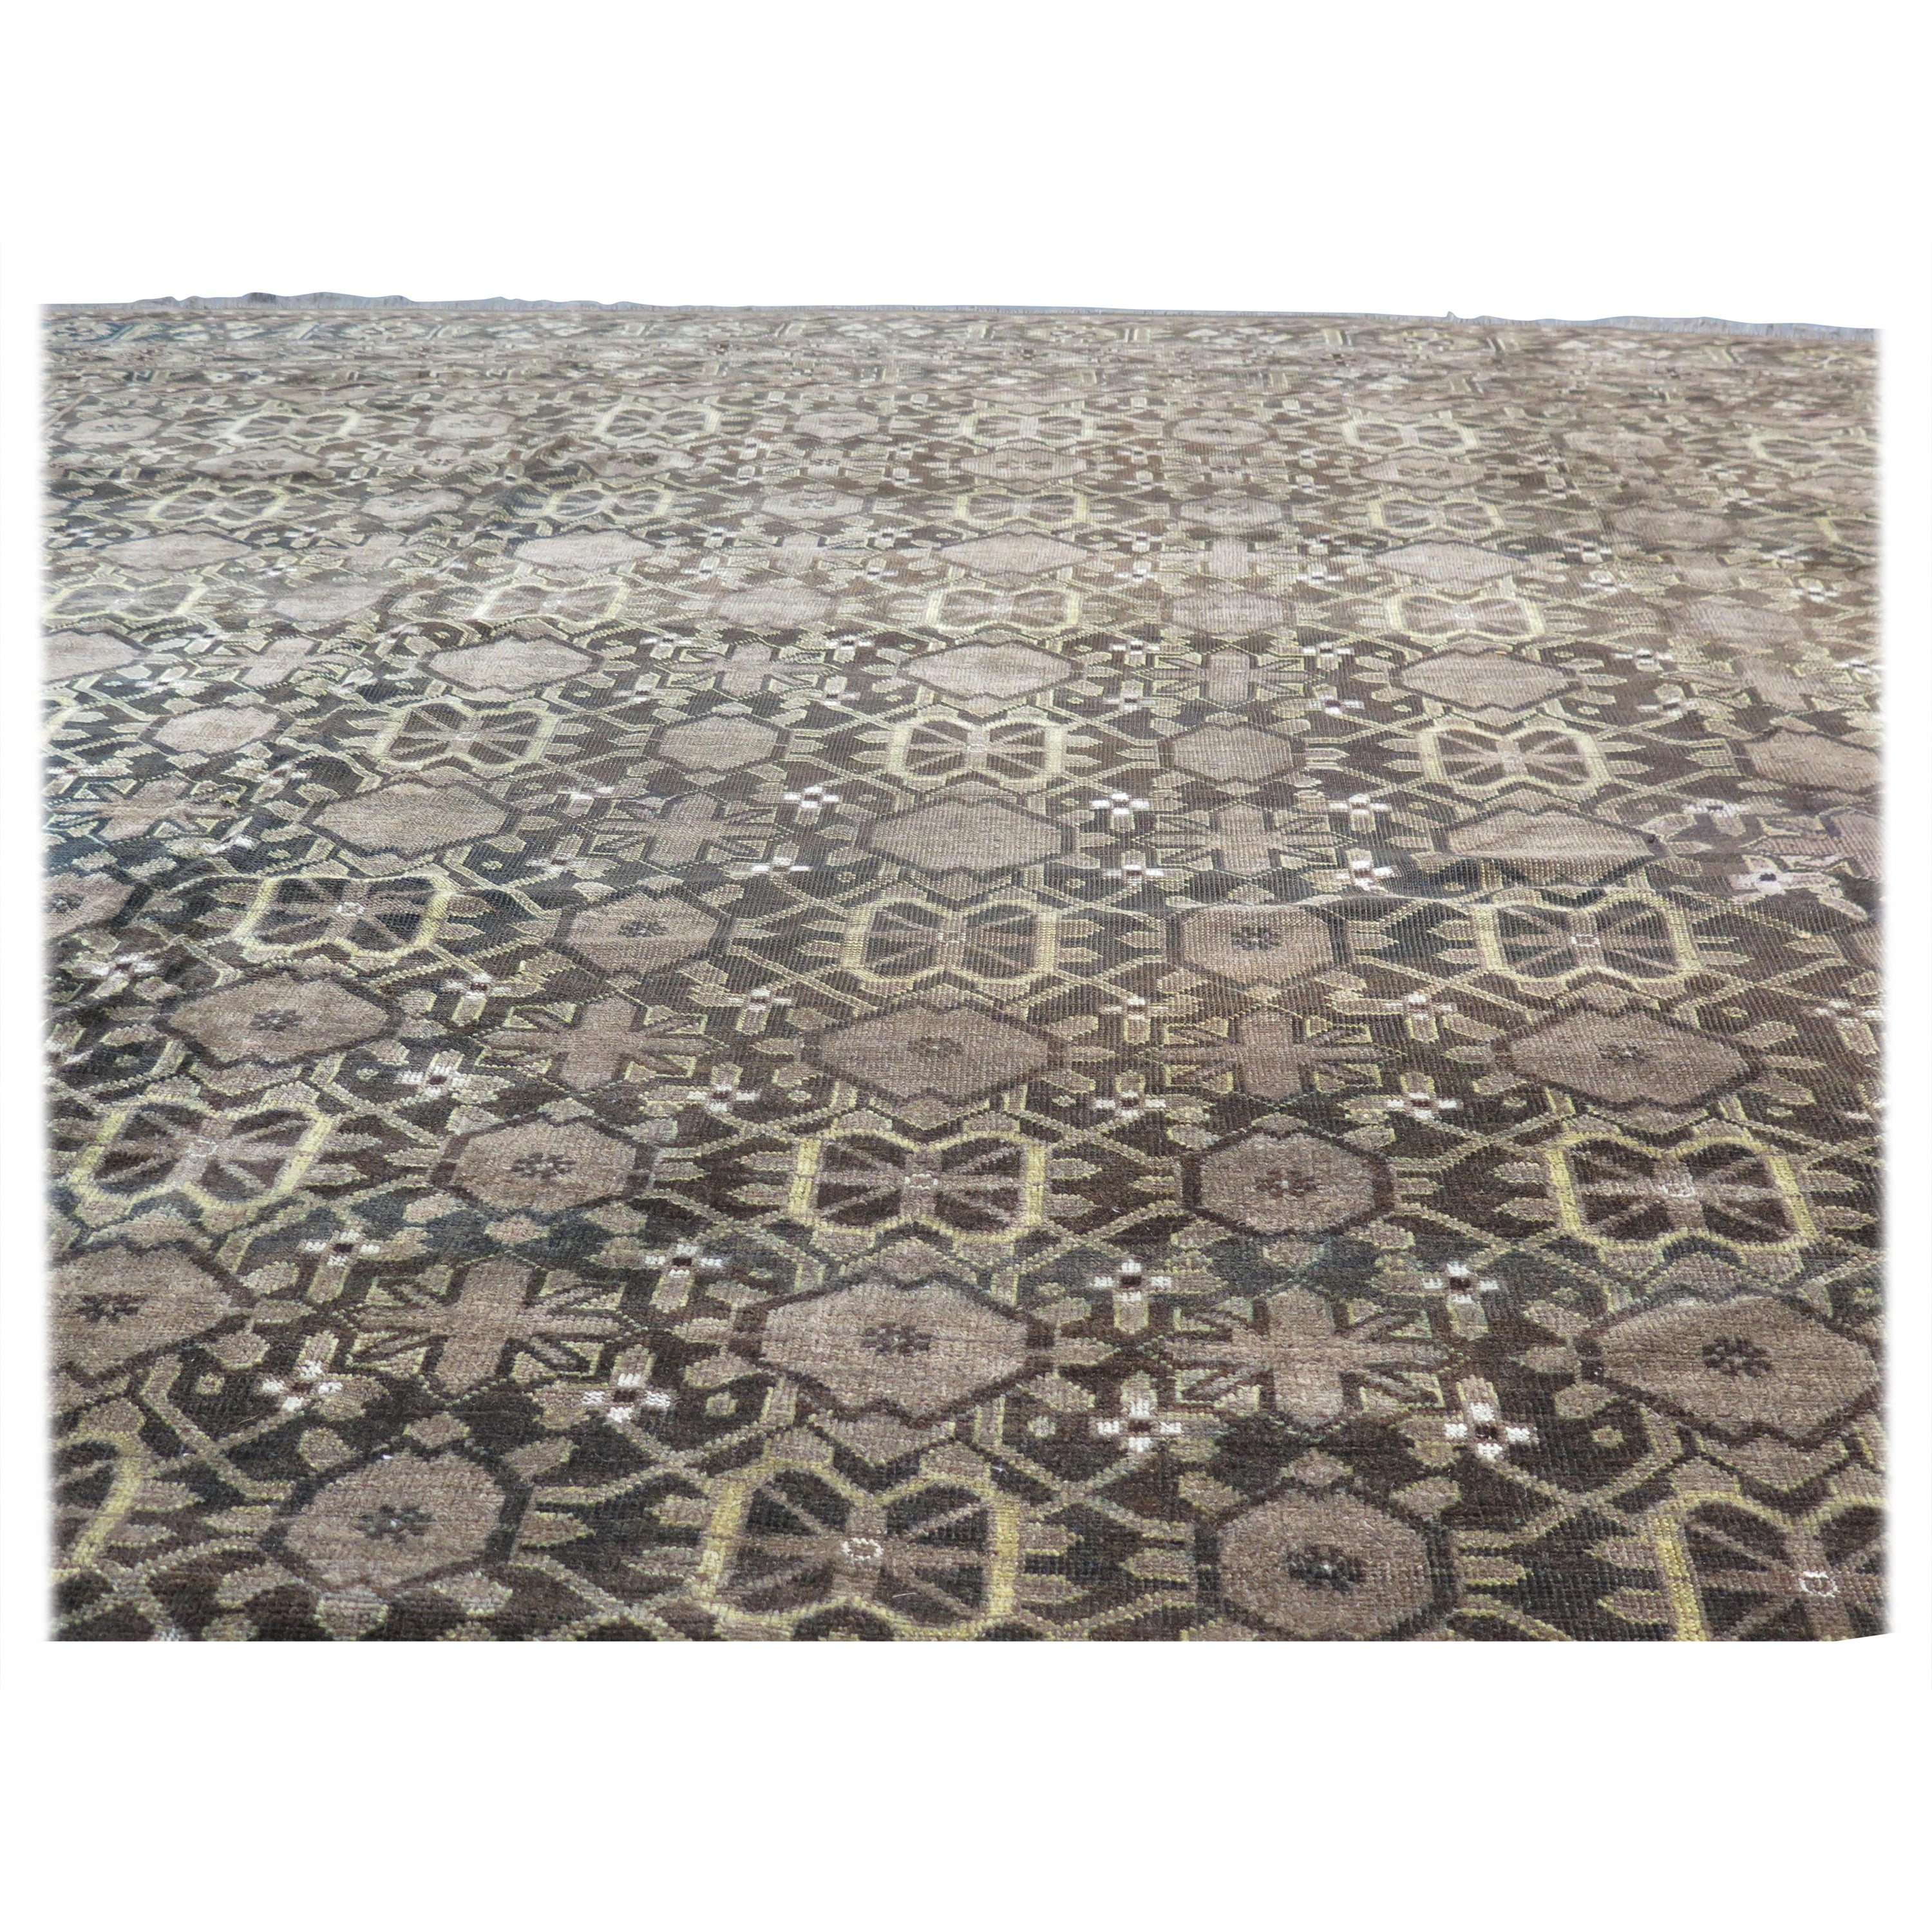 Understated 1890s Beshir Carpet For Sale